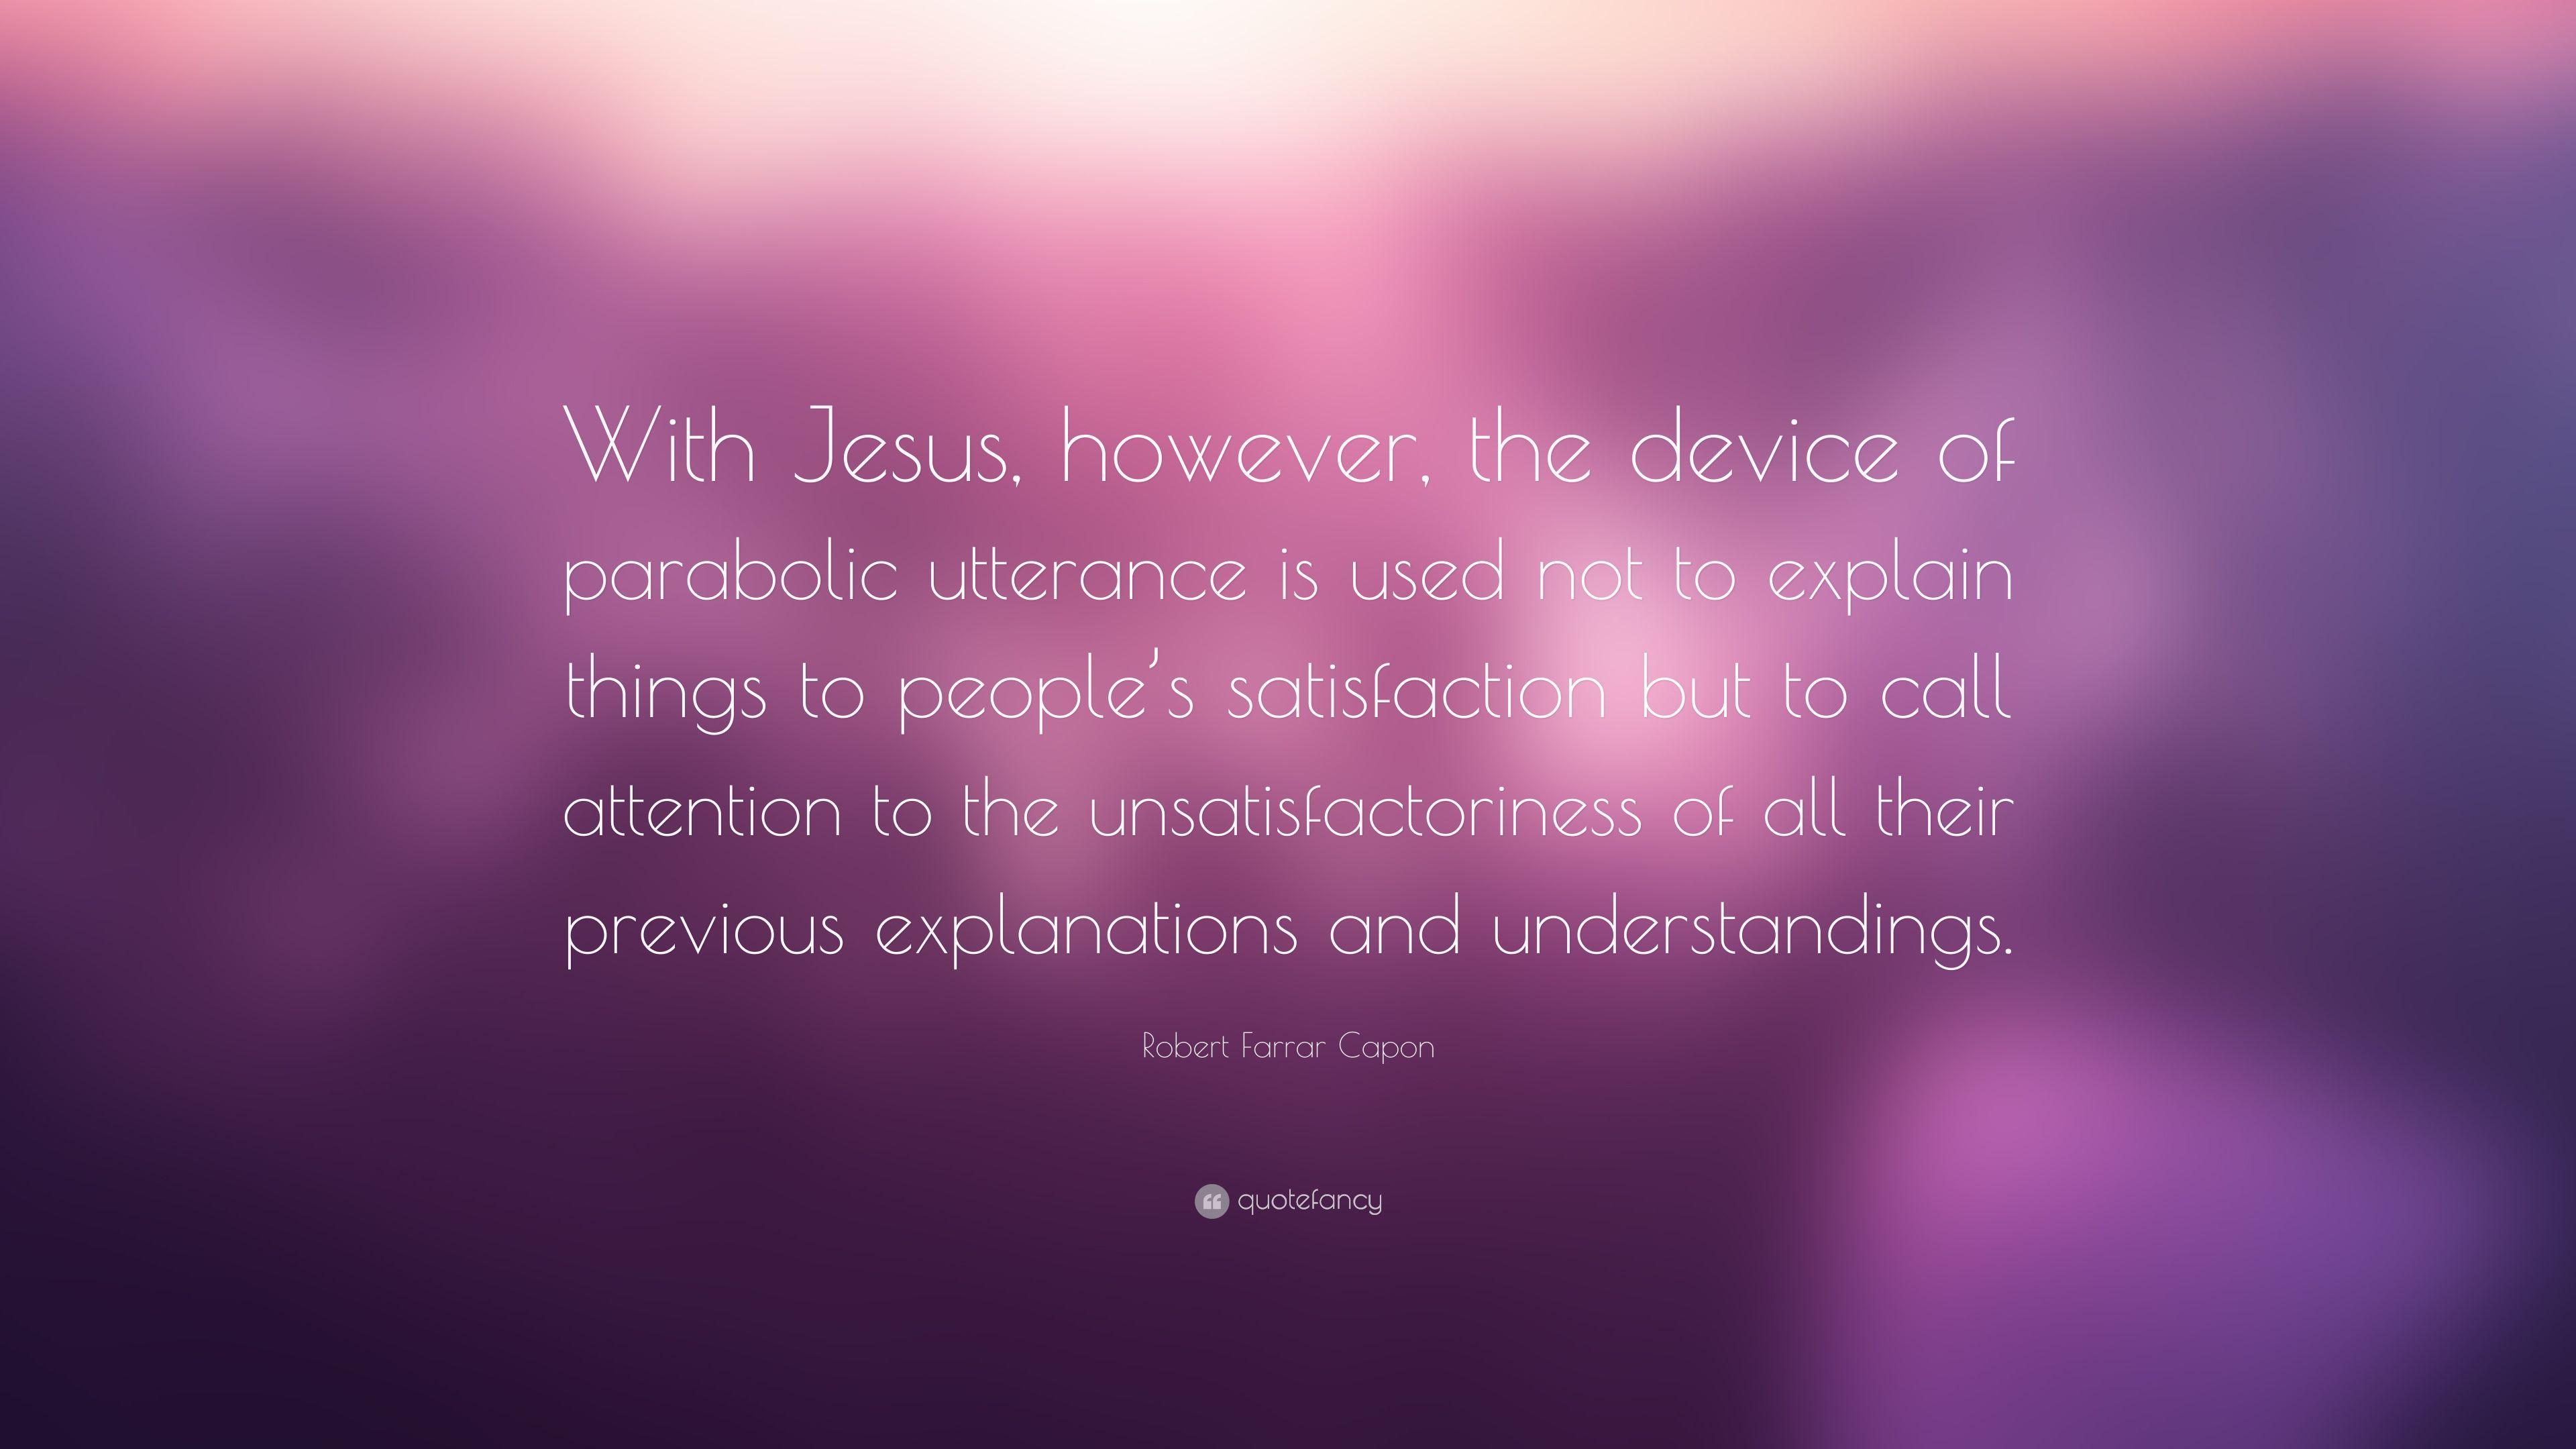 Robert Farrar Capon Quote: “With Jesus, however, the device